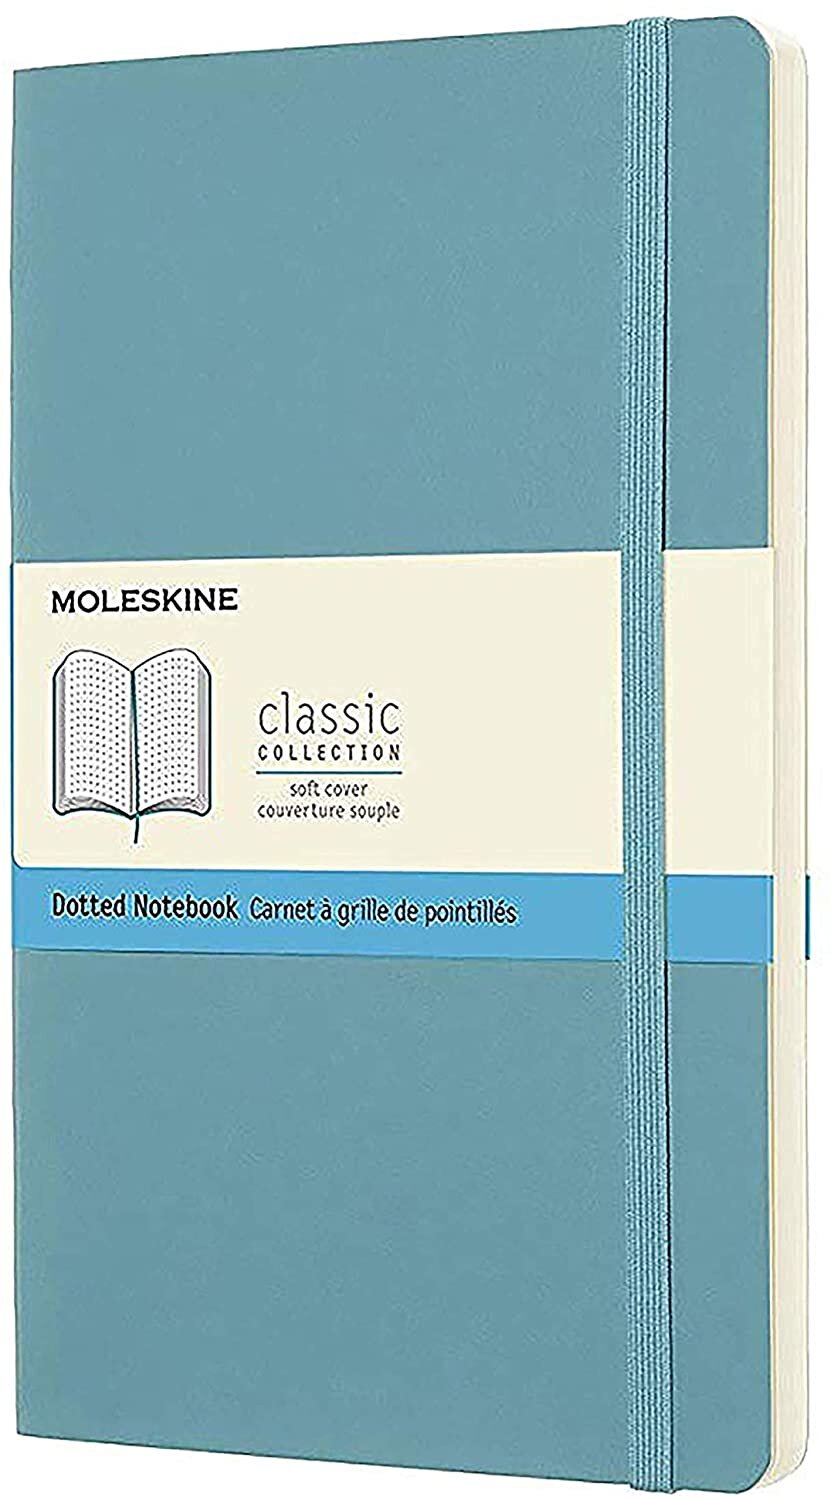 Moleskine Classic Collection Large Dotted Notebook Soft Cover 